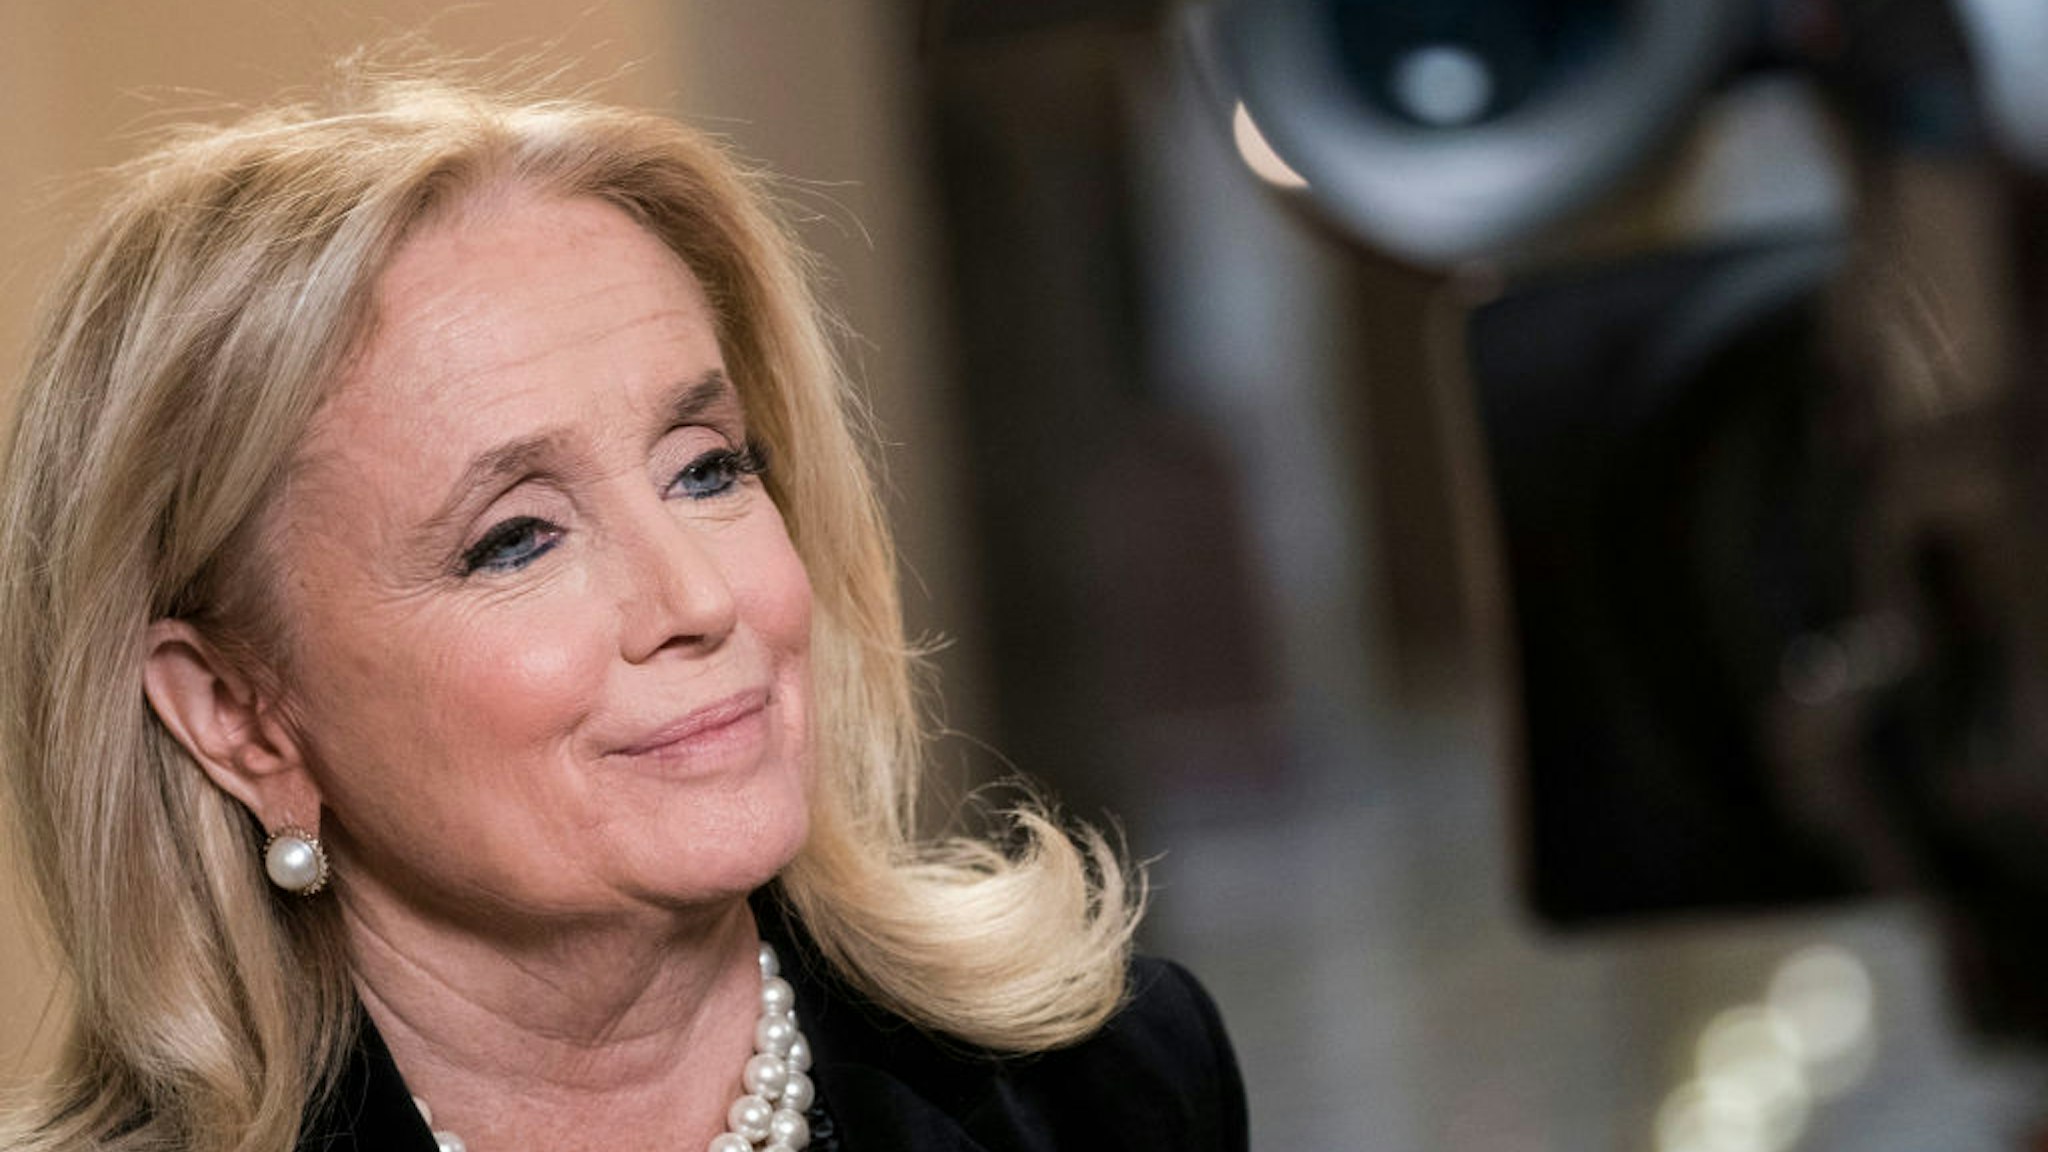 Rep. Debbie Dingell (D-MI) speaks with MSNBC to discuss U.S. President Donald Trump's comments about her late husband, former Rep. John Dingell (D-MI), at the U.S. Capitol on December 19, 2019 in Washington, DC. President Trump suggested Dingell was "looking up" from hell during a campaign rally in Michigan on Wednesday. (Photo by Sarah Silbiger/Getty Images)